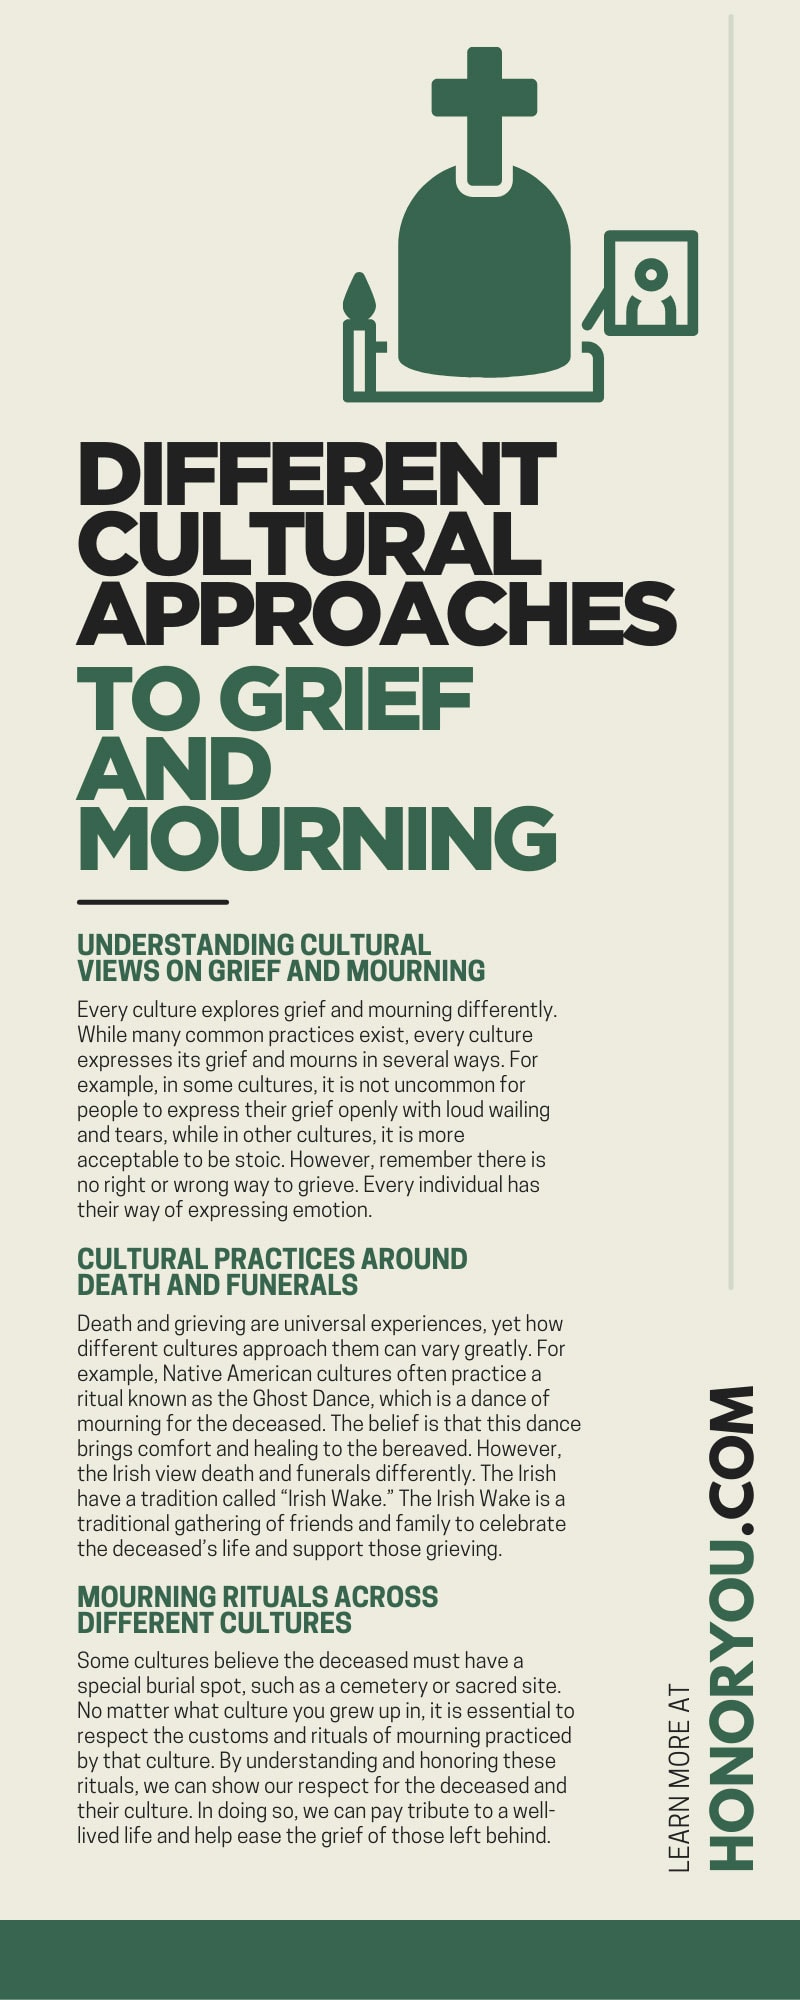 Different Cultural Approaches to Grief and Mourning
